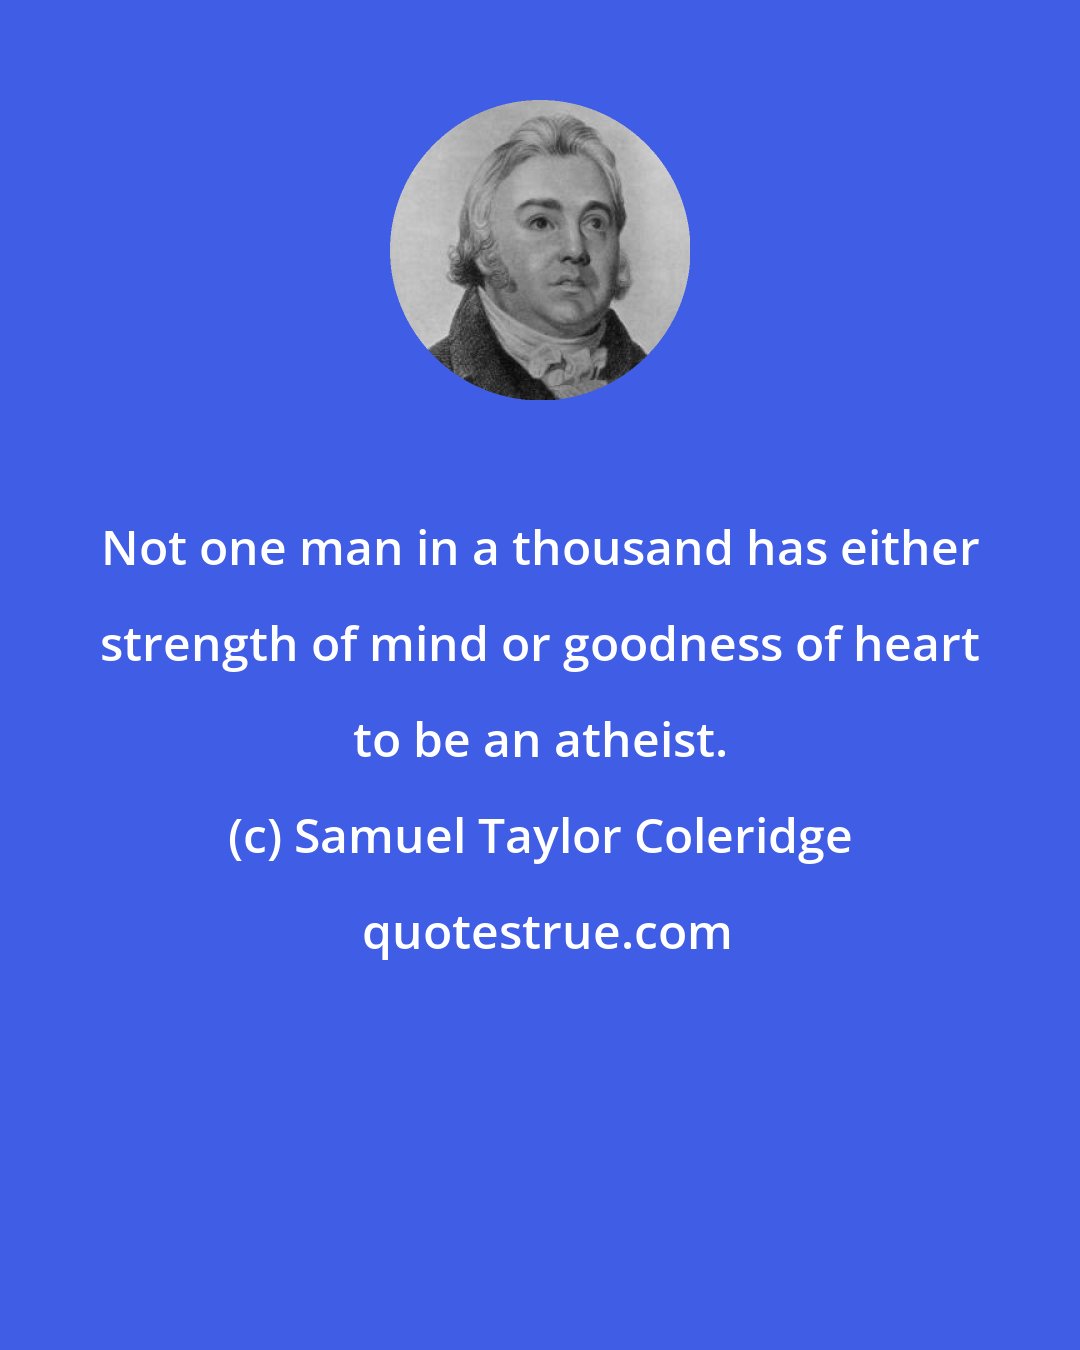 Samuel Taylor Coleridge: Not one man in a thousand has either strength of mind or goodness of heart to be an atheist.